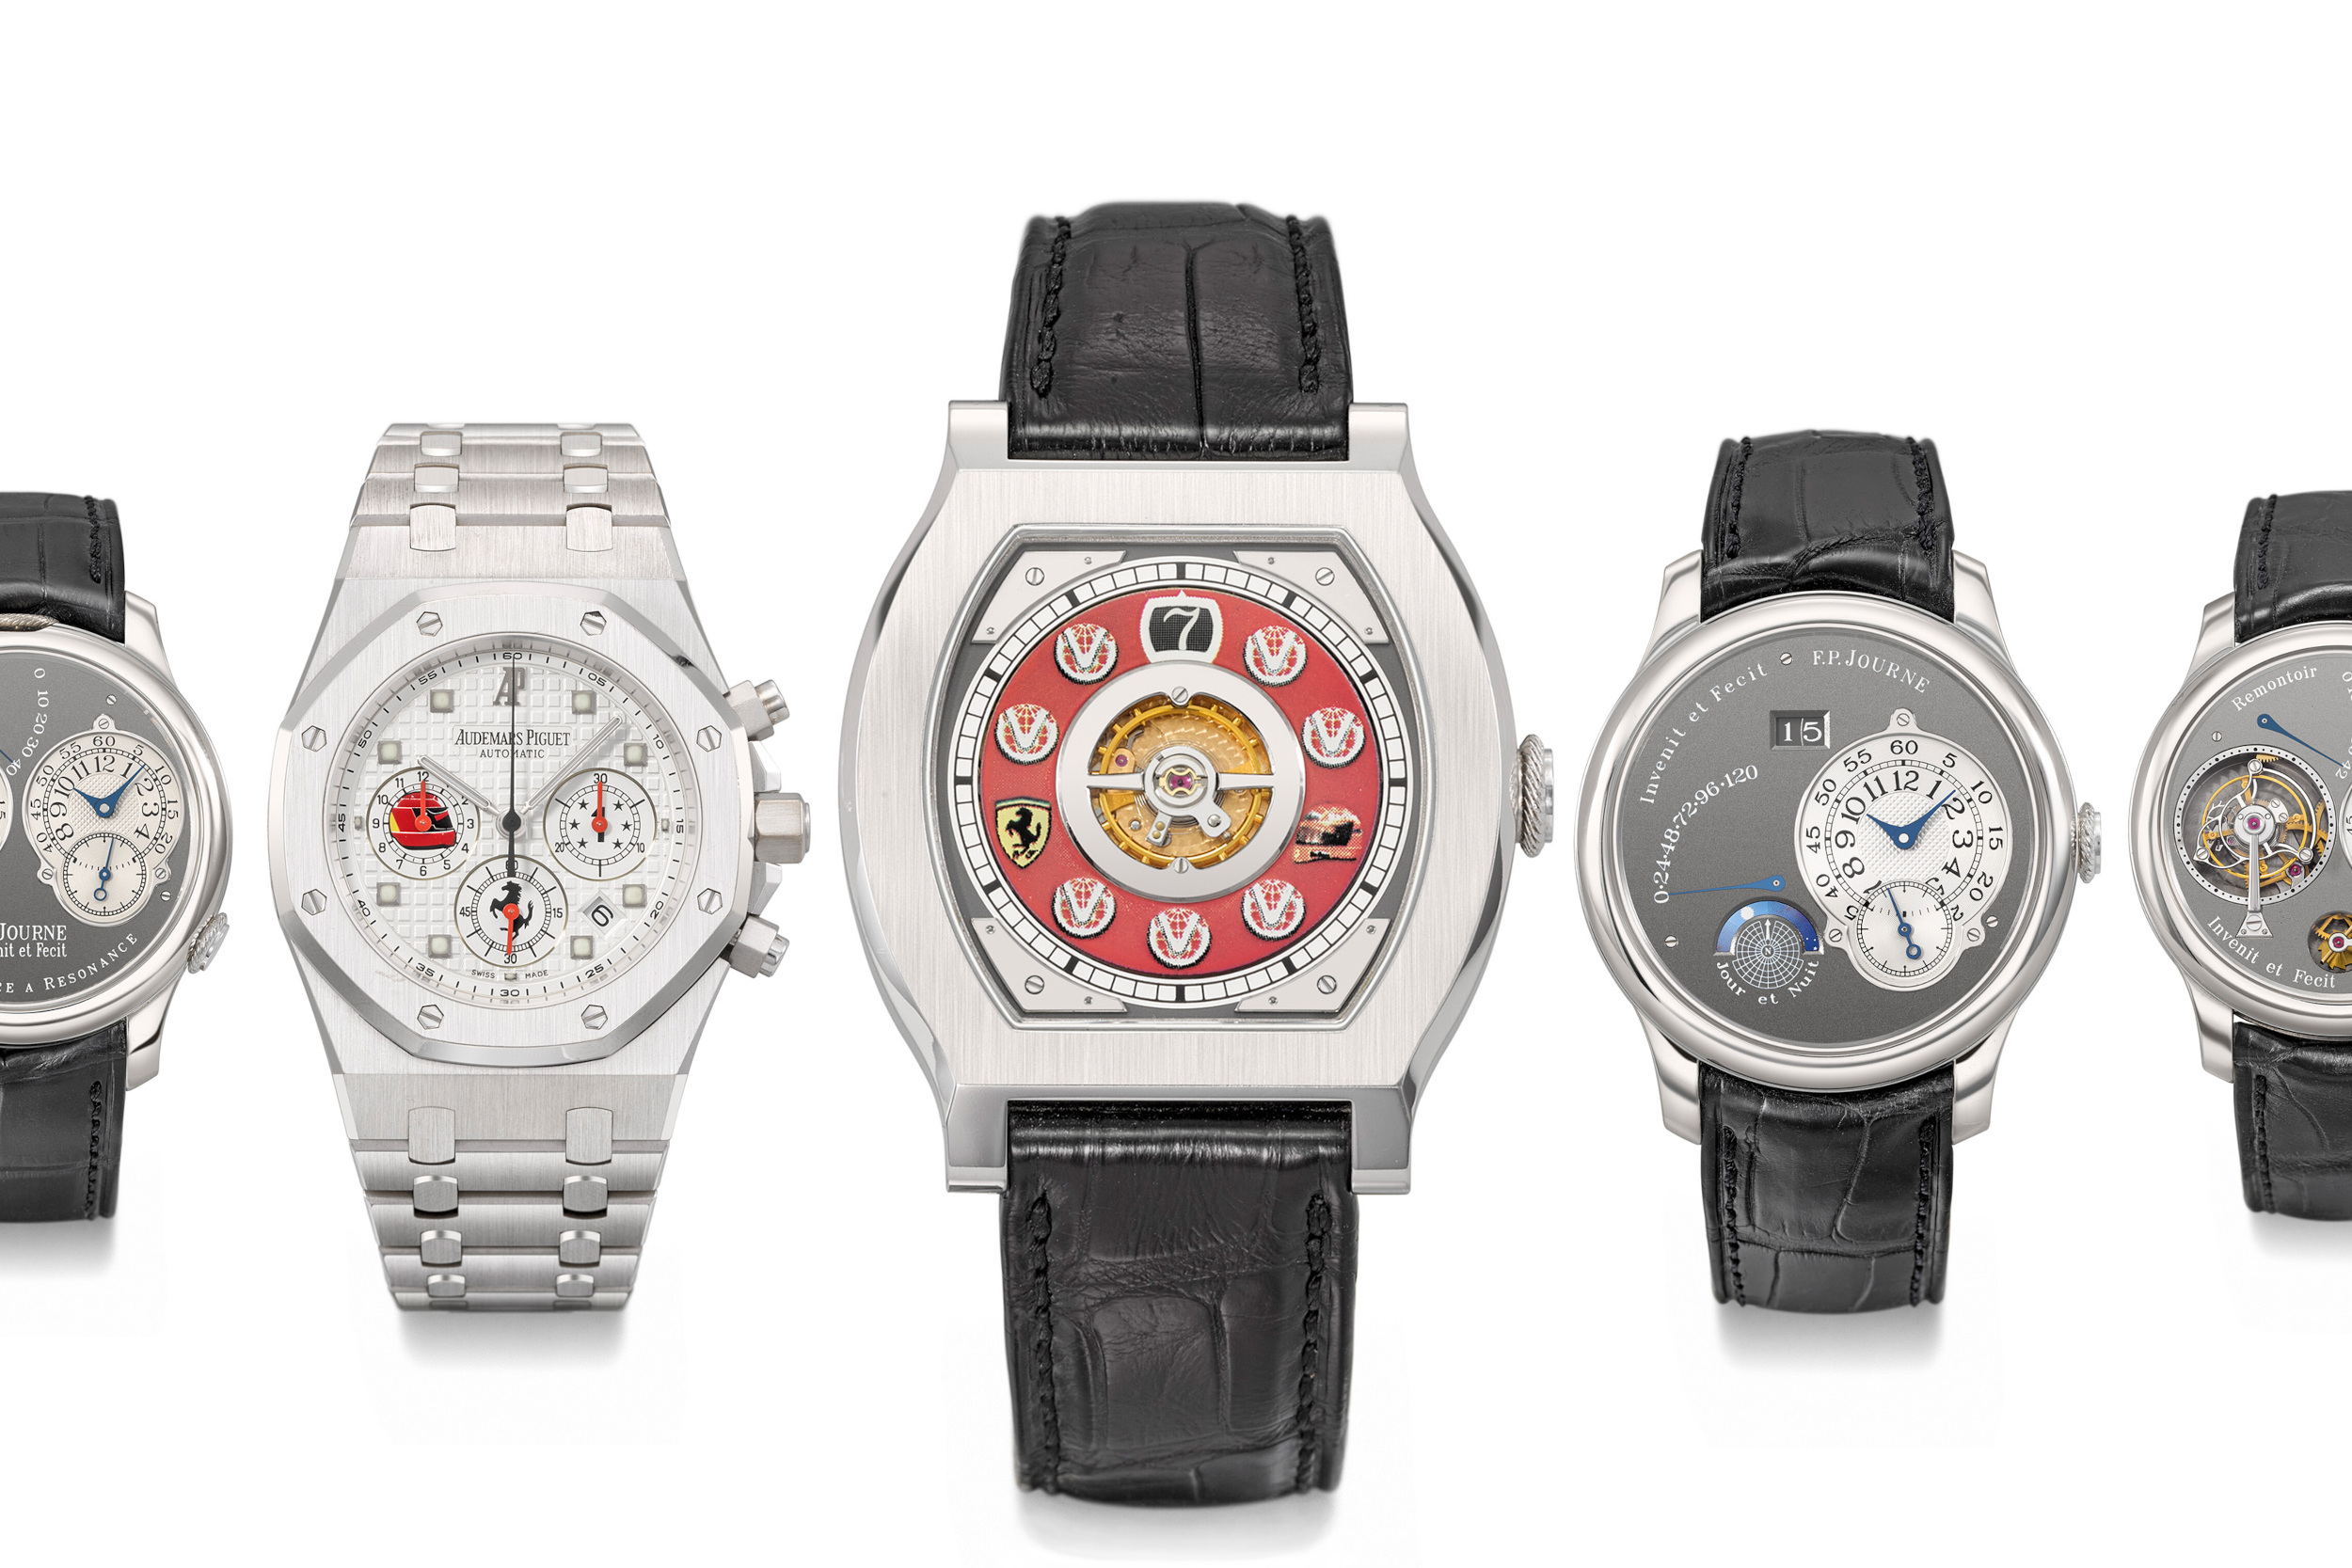 Christie’s Rare Watches Including the Property of Michael Schumacher